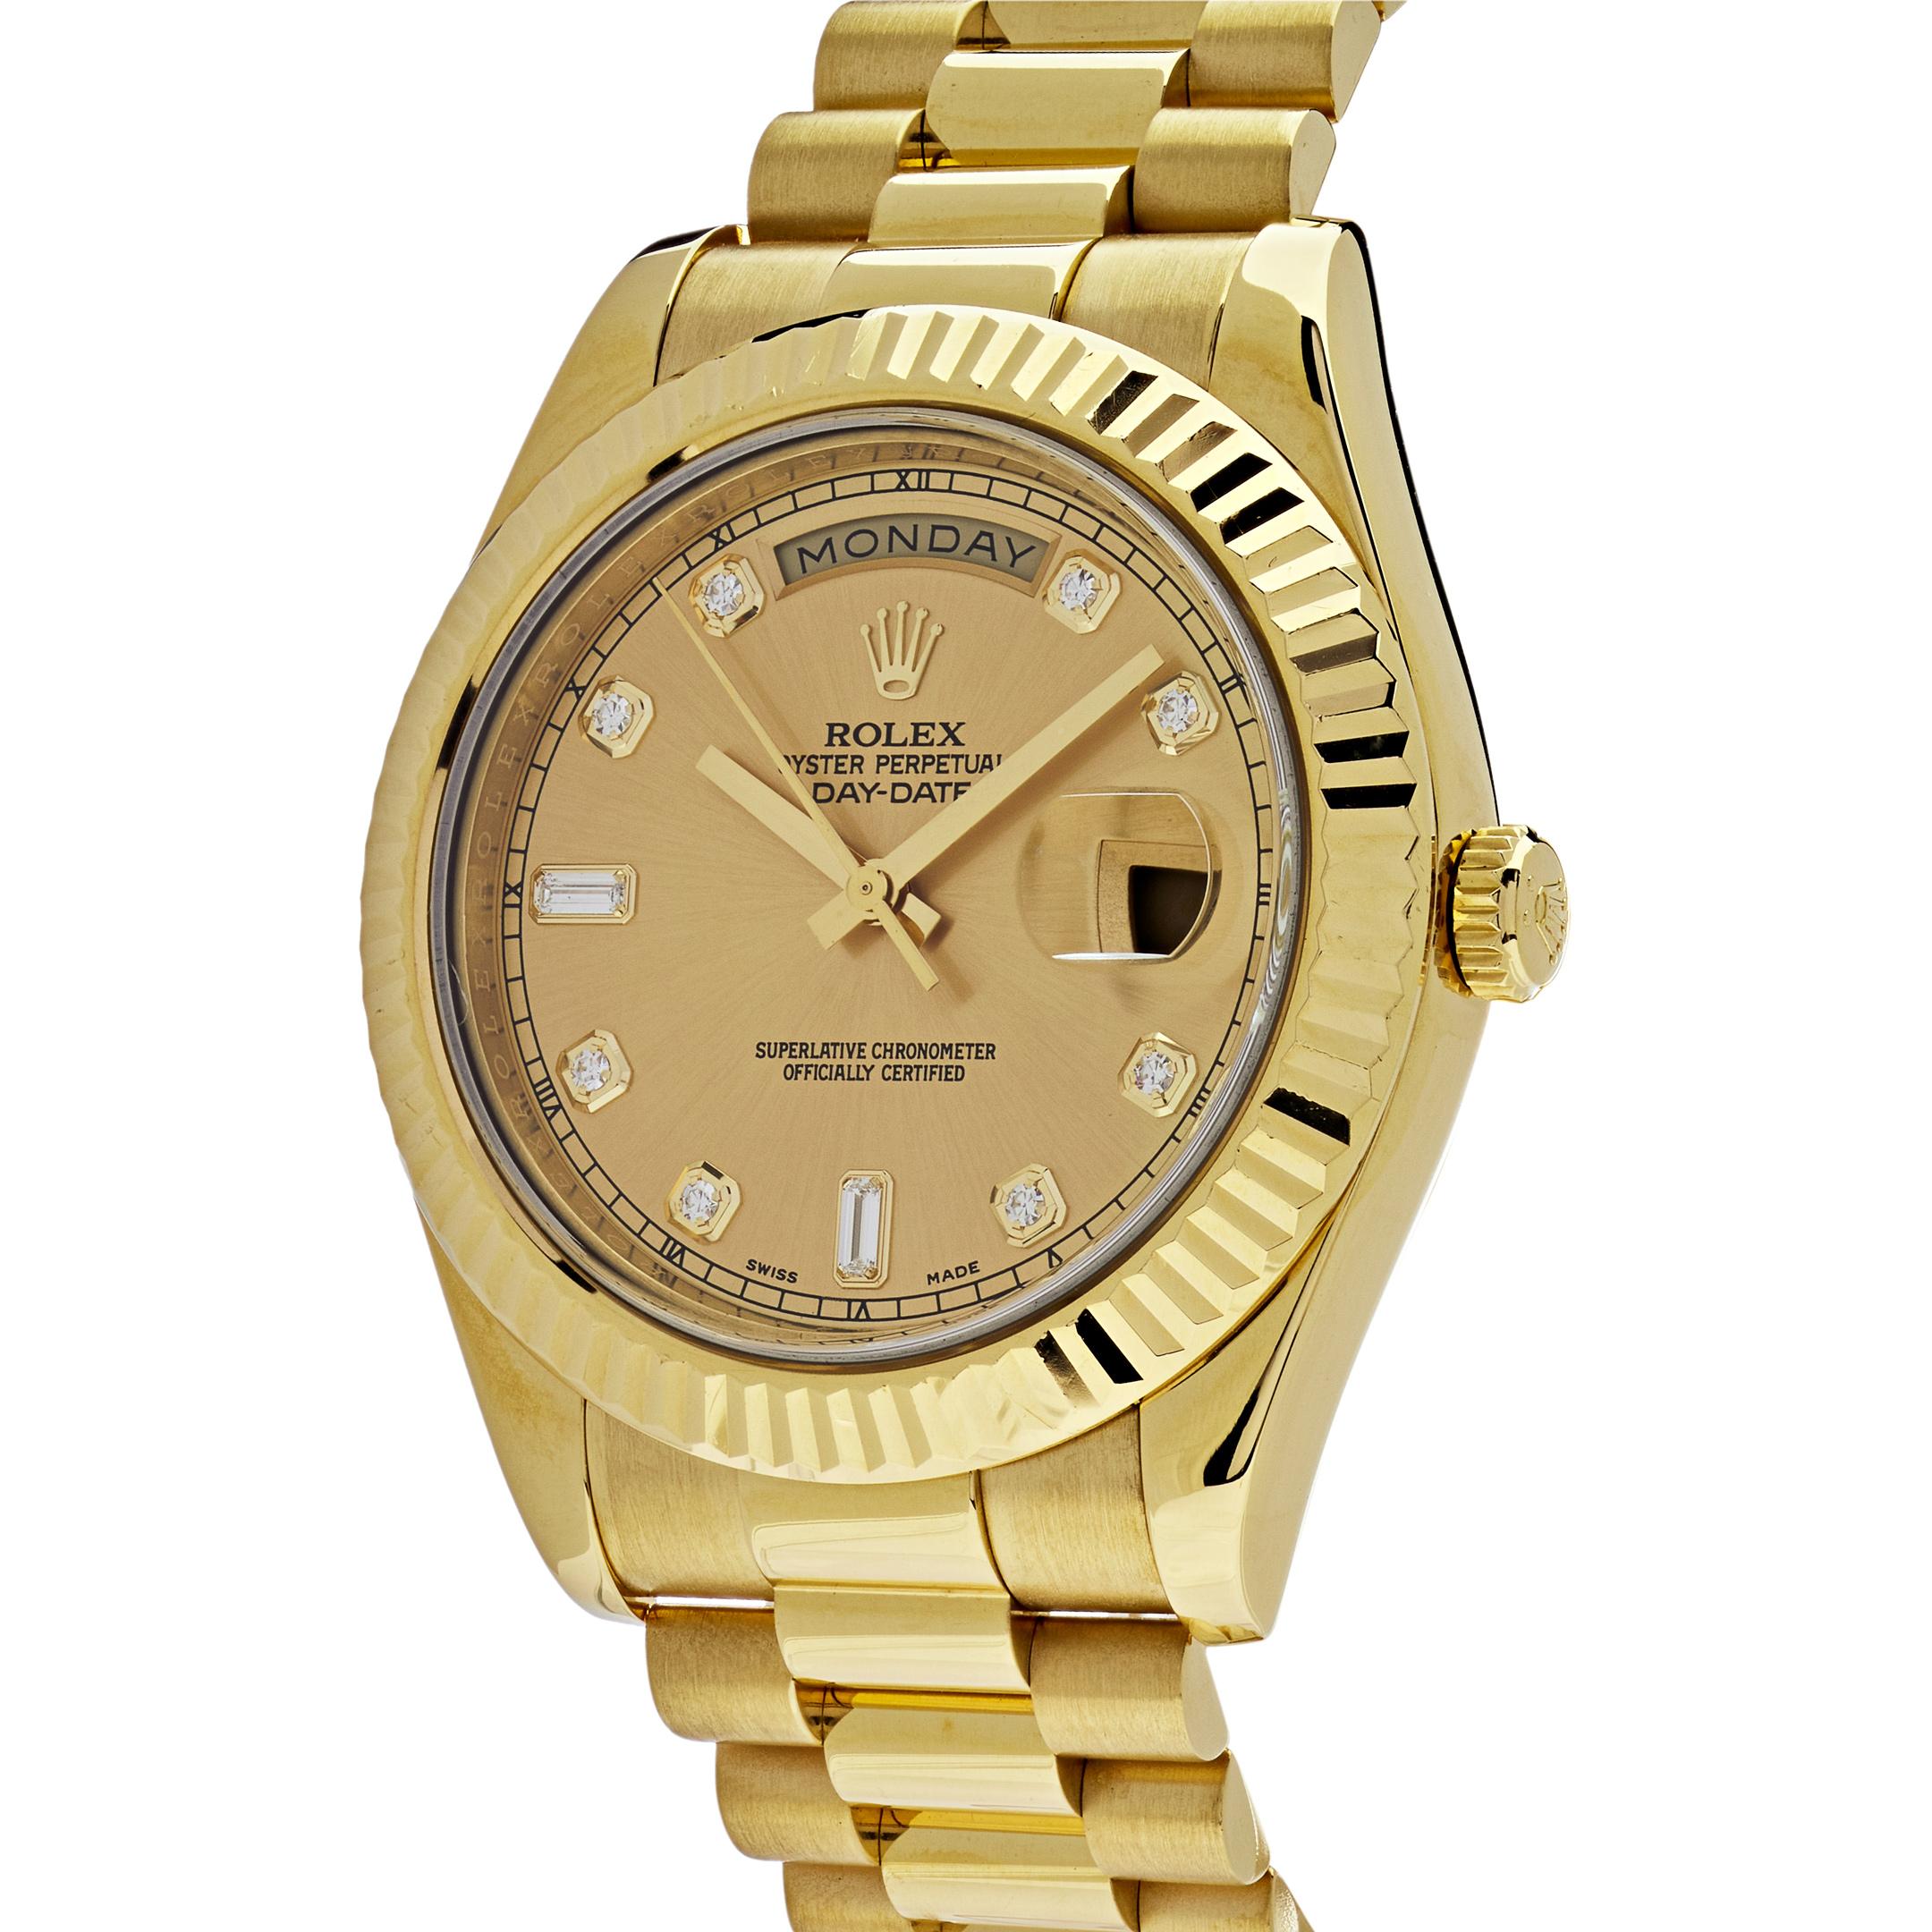 The Rolex Presidential Day-Date 41mm is inlaid in yellow gold, designed with a lavish champagne dial surrounded by diamonds, a fluted bezel and an automatic movement. The signature presidential bracelet includes, semi-circular three-piece links and